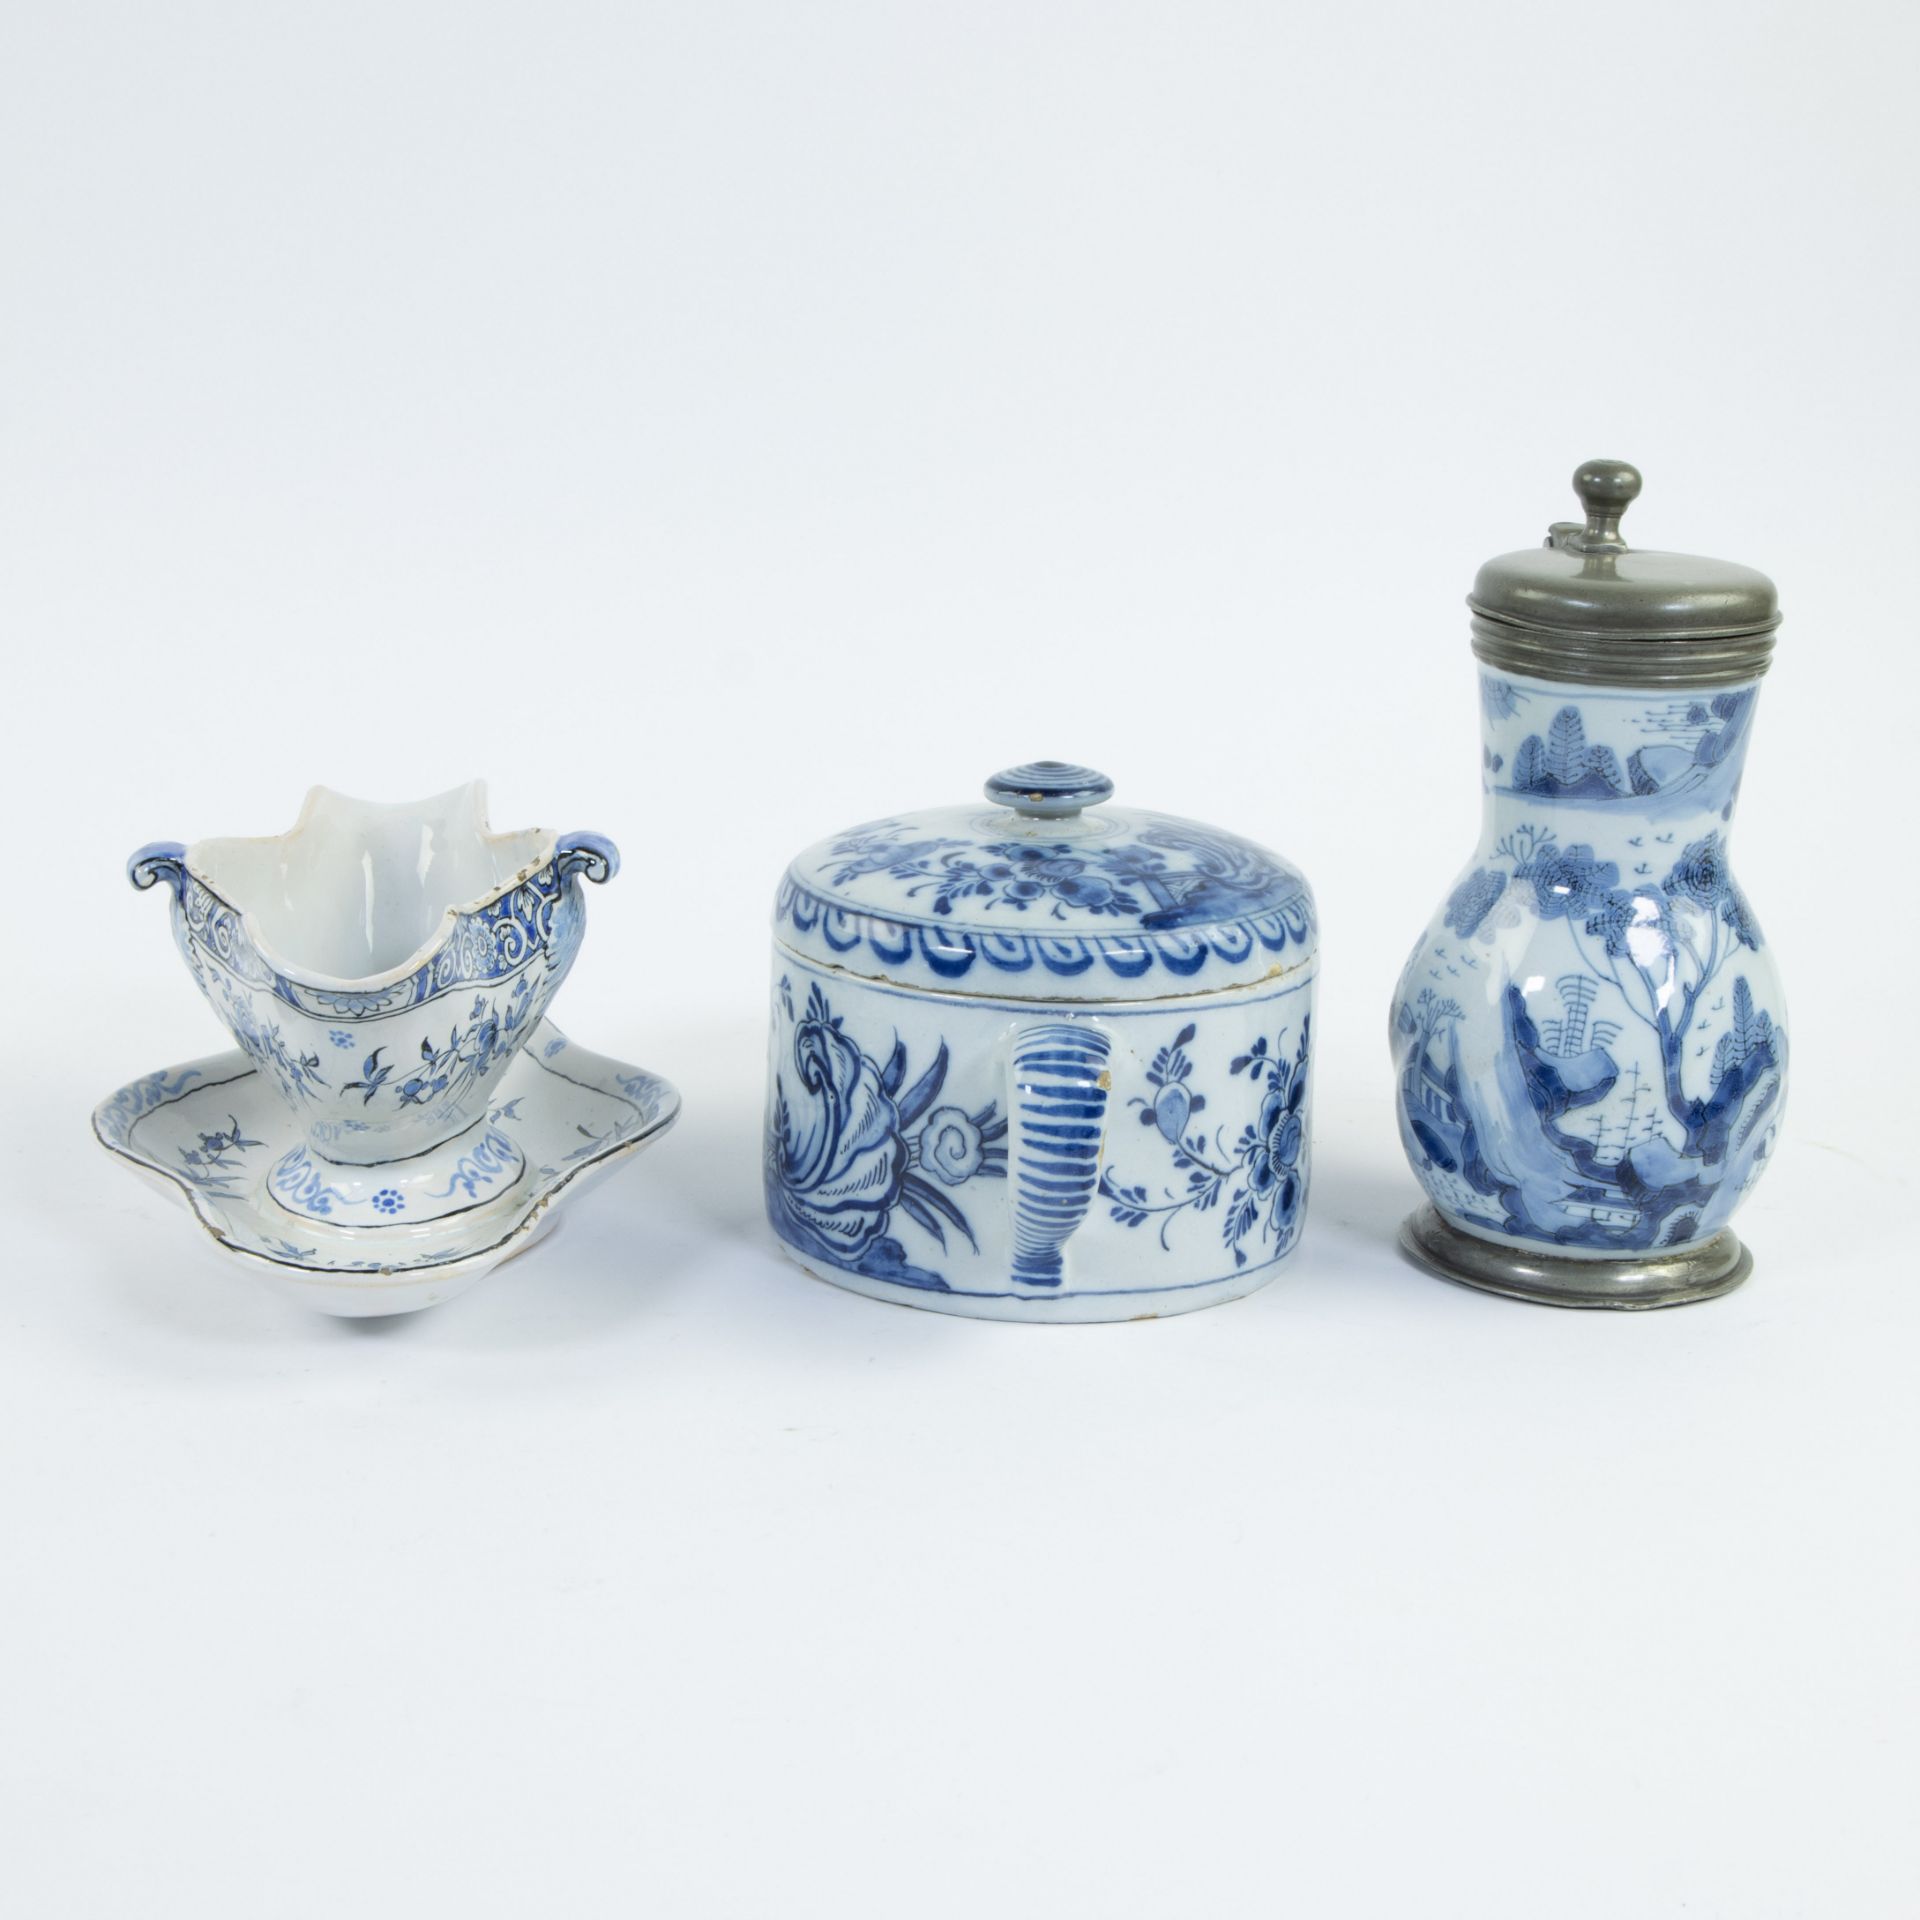 Lot Delft butter pot 18th century, jug circa 1700 and sauce bowl Lille 18th century - Image 2 of 5